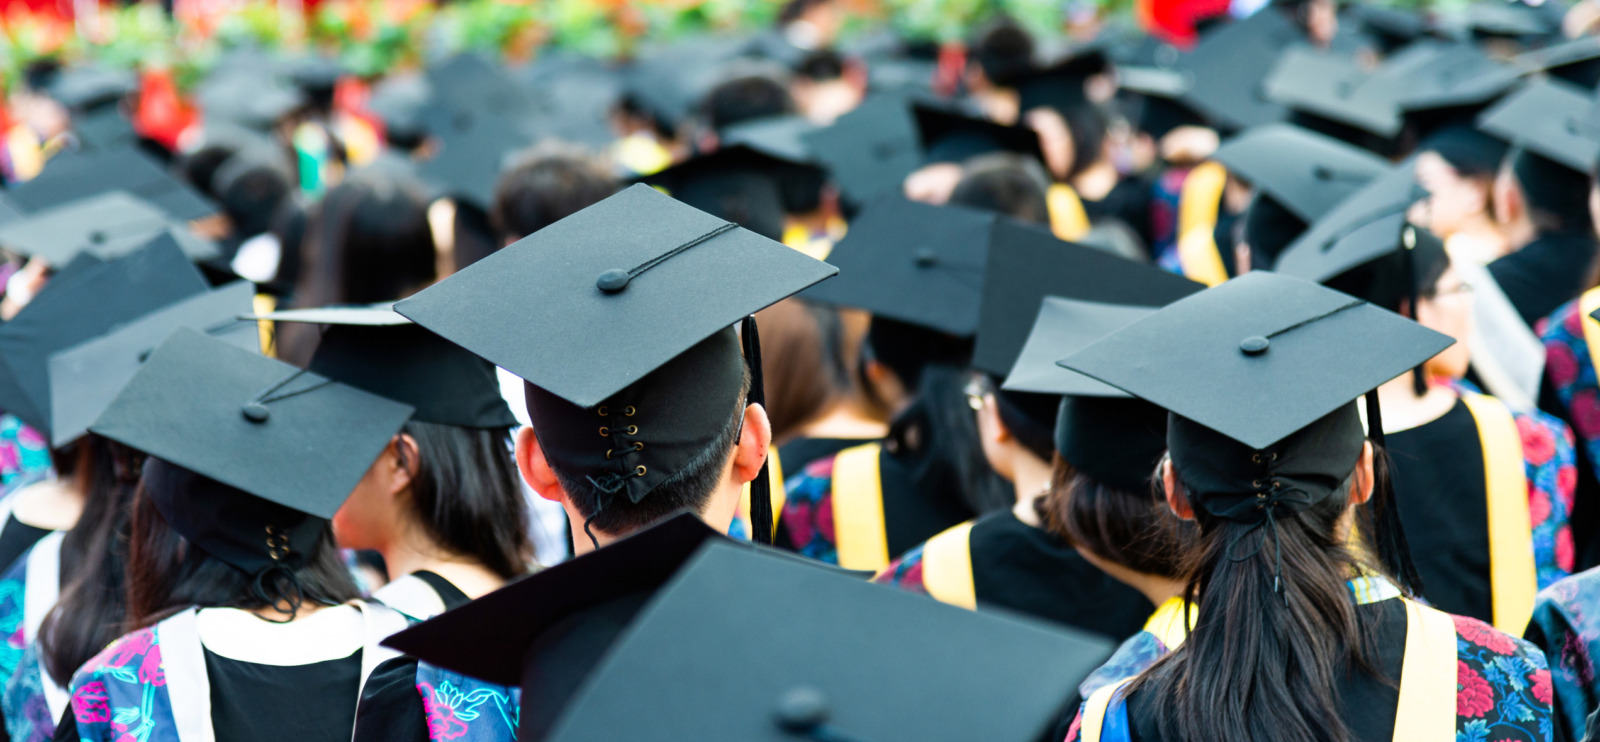 5 Job Search Tips For Recent College Grads